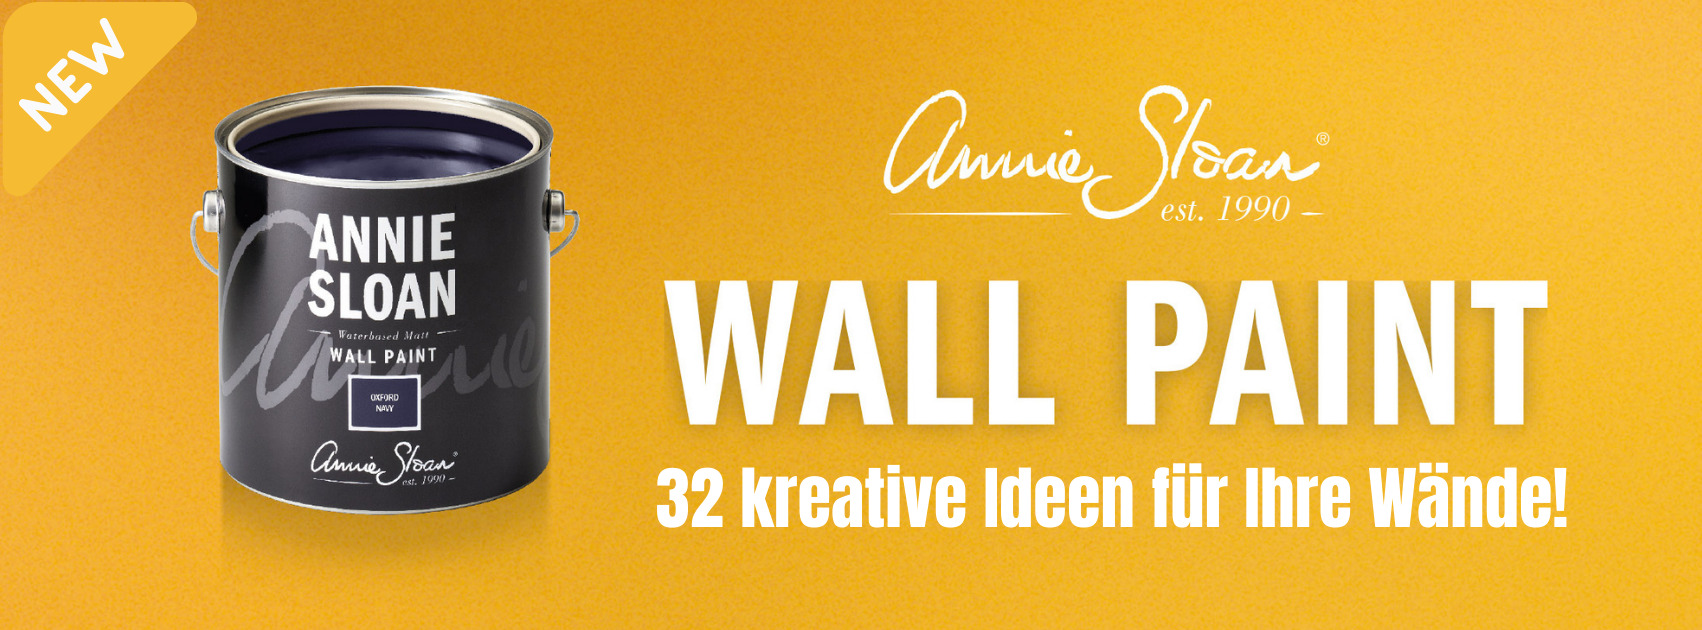 new-wall-paint-annie-sloan-melflair